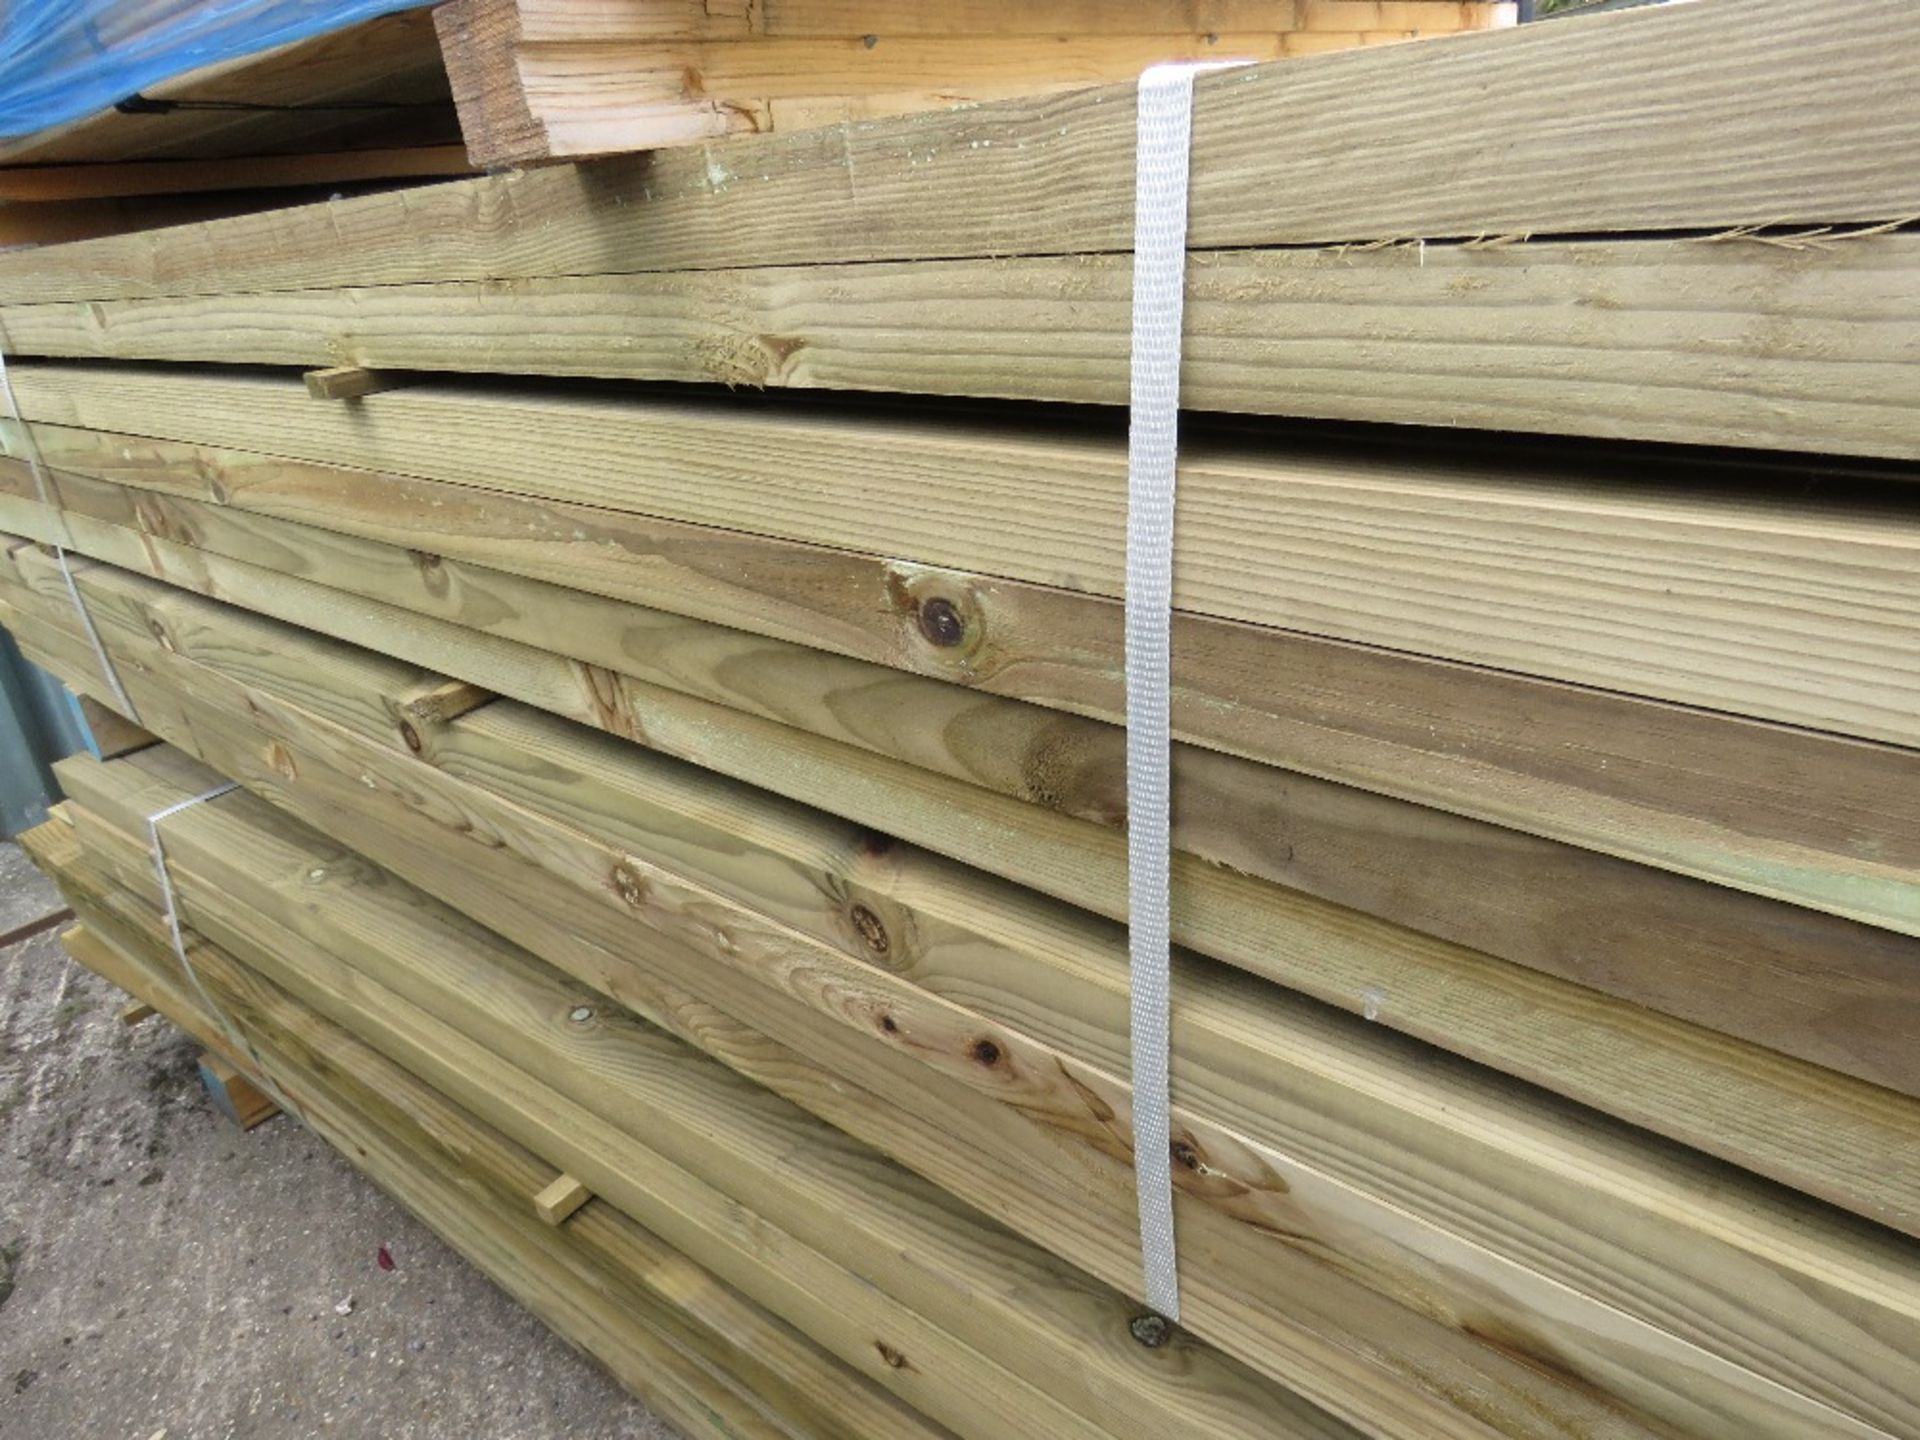 SMALL PACK OF UNTREATED HIT AND MISS FENCE CLADDING TIMBER BOARDS, 1.44 M LENGTH X 9CM WIDTH APPROX. - Image 3 of 4